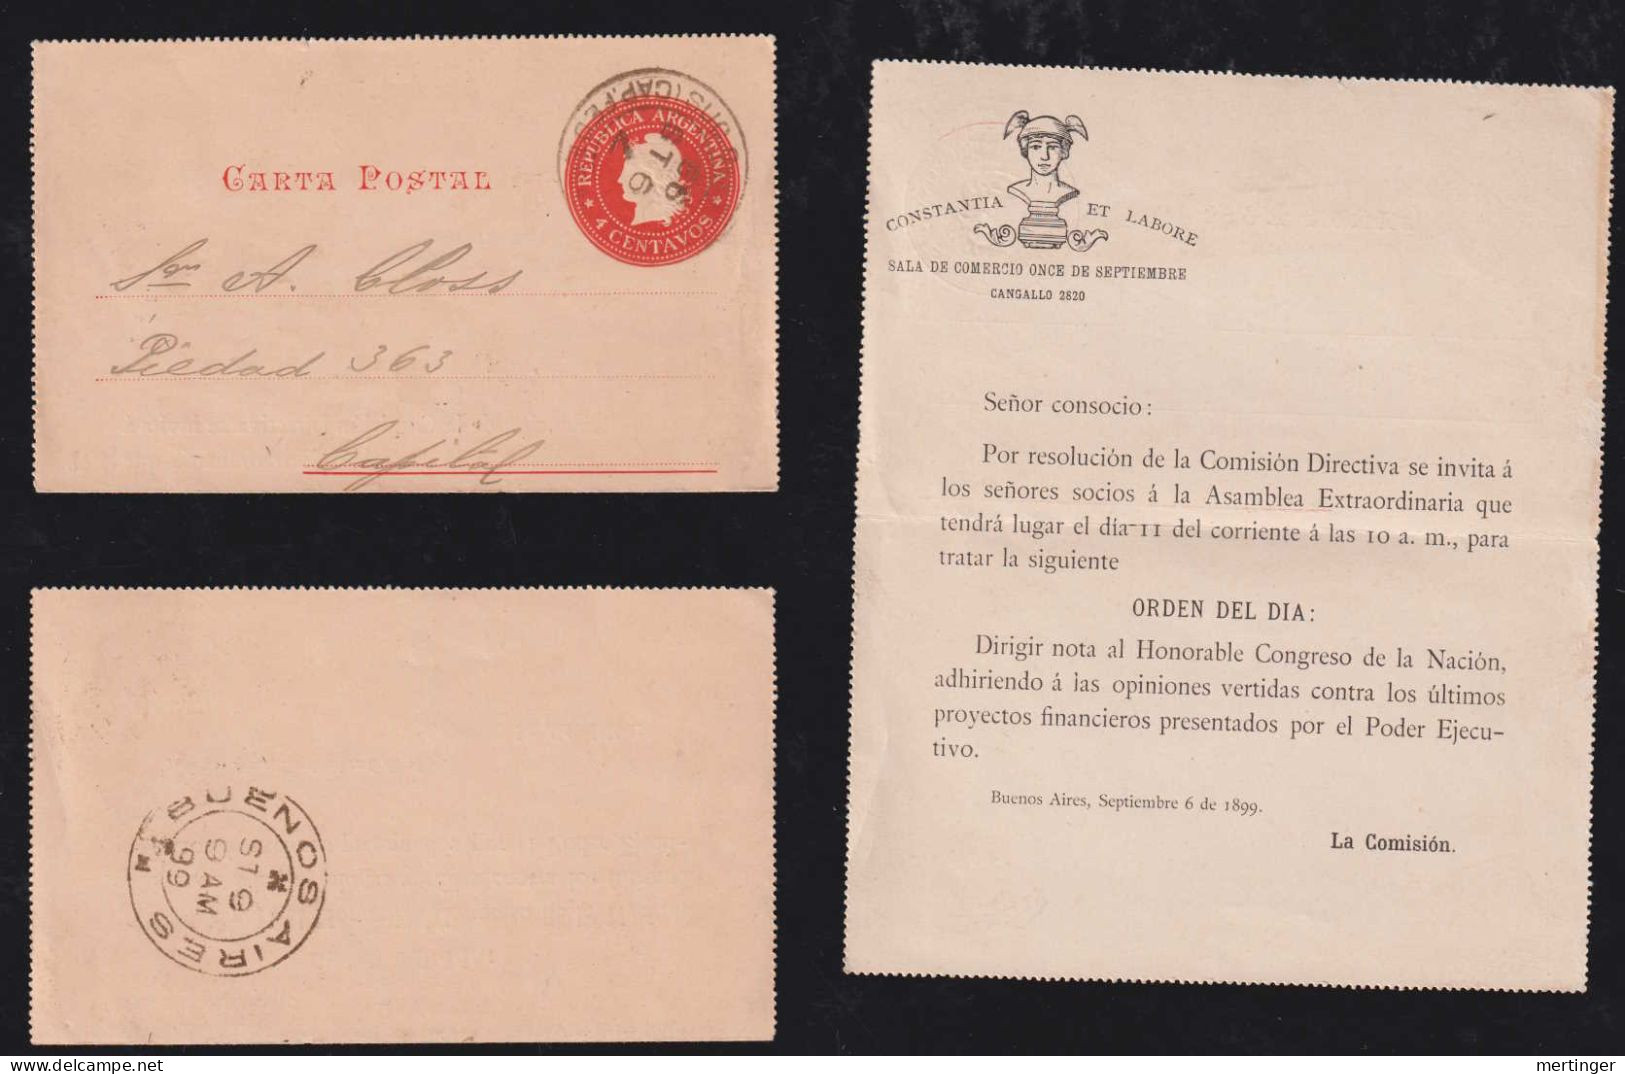 Argentina 1899 Stationery Lettercard Used BUENOS AIRES Private Imprint Constantia Et Labore - Covers & Documents